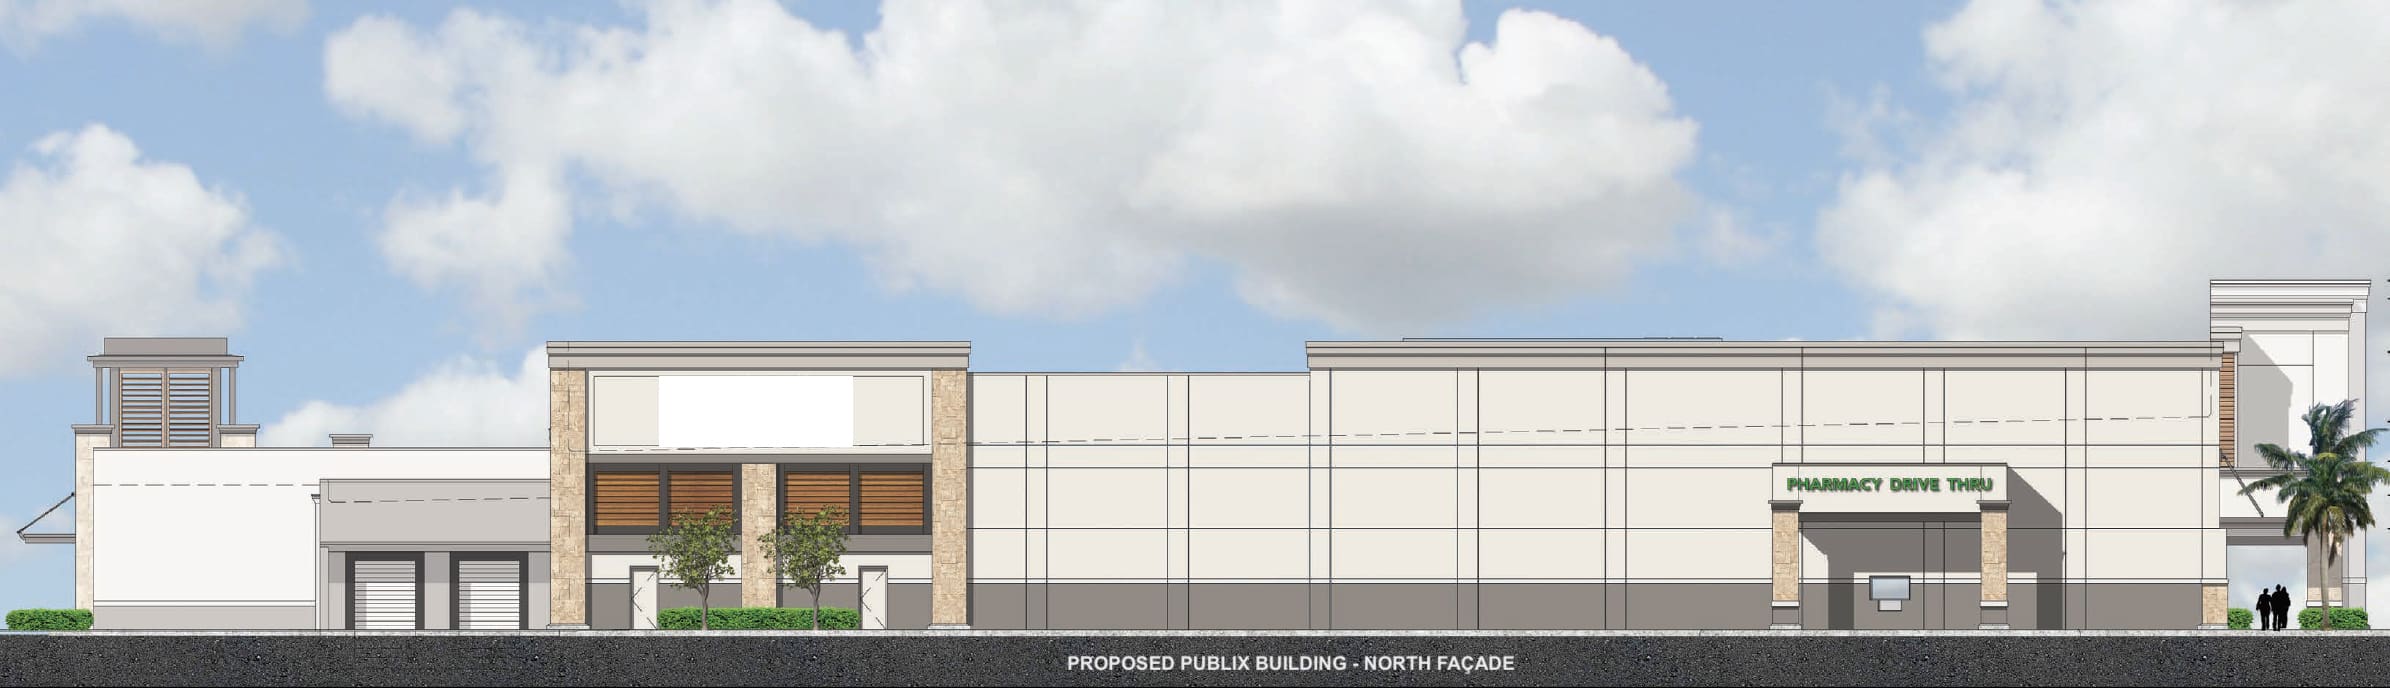 North façade of new Publix building proposed for Isle Casino property.